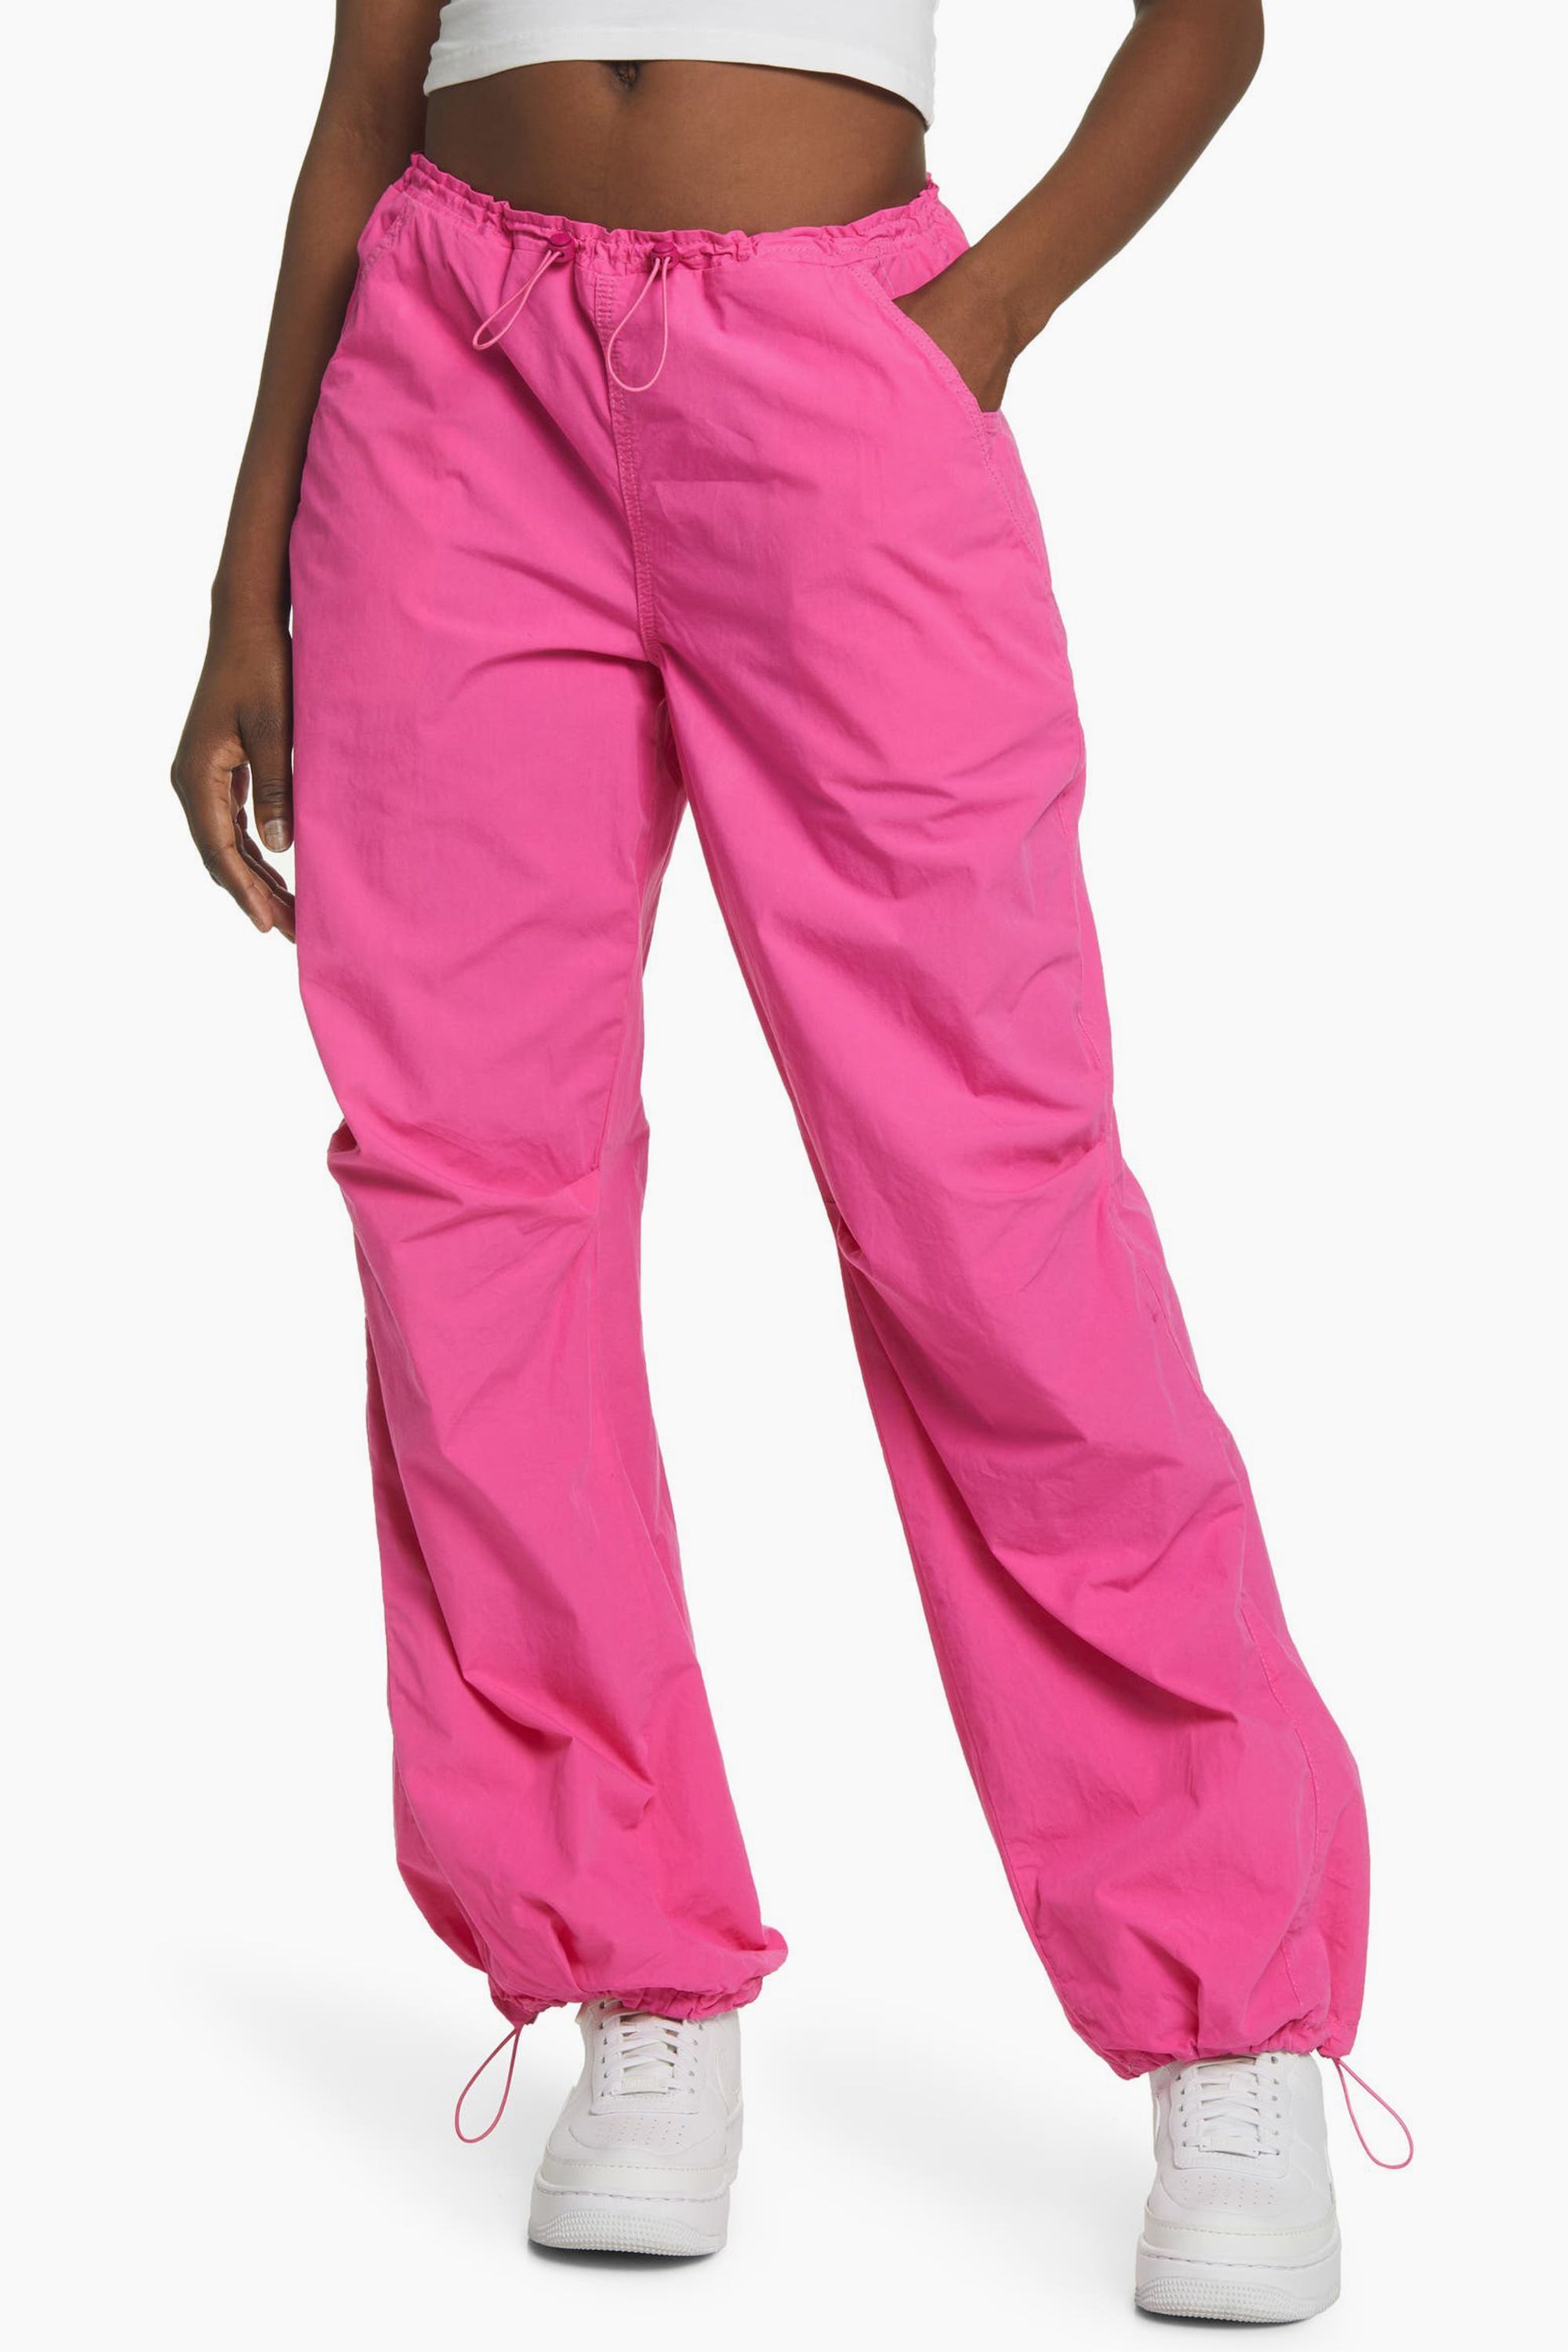 Pink Womens Clothing Trousers Zaful Cotton Drawstring Wide Leg Parachute Cargo Pants in Light Pink Slacks and Chinos Cargo trousers 